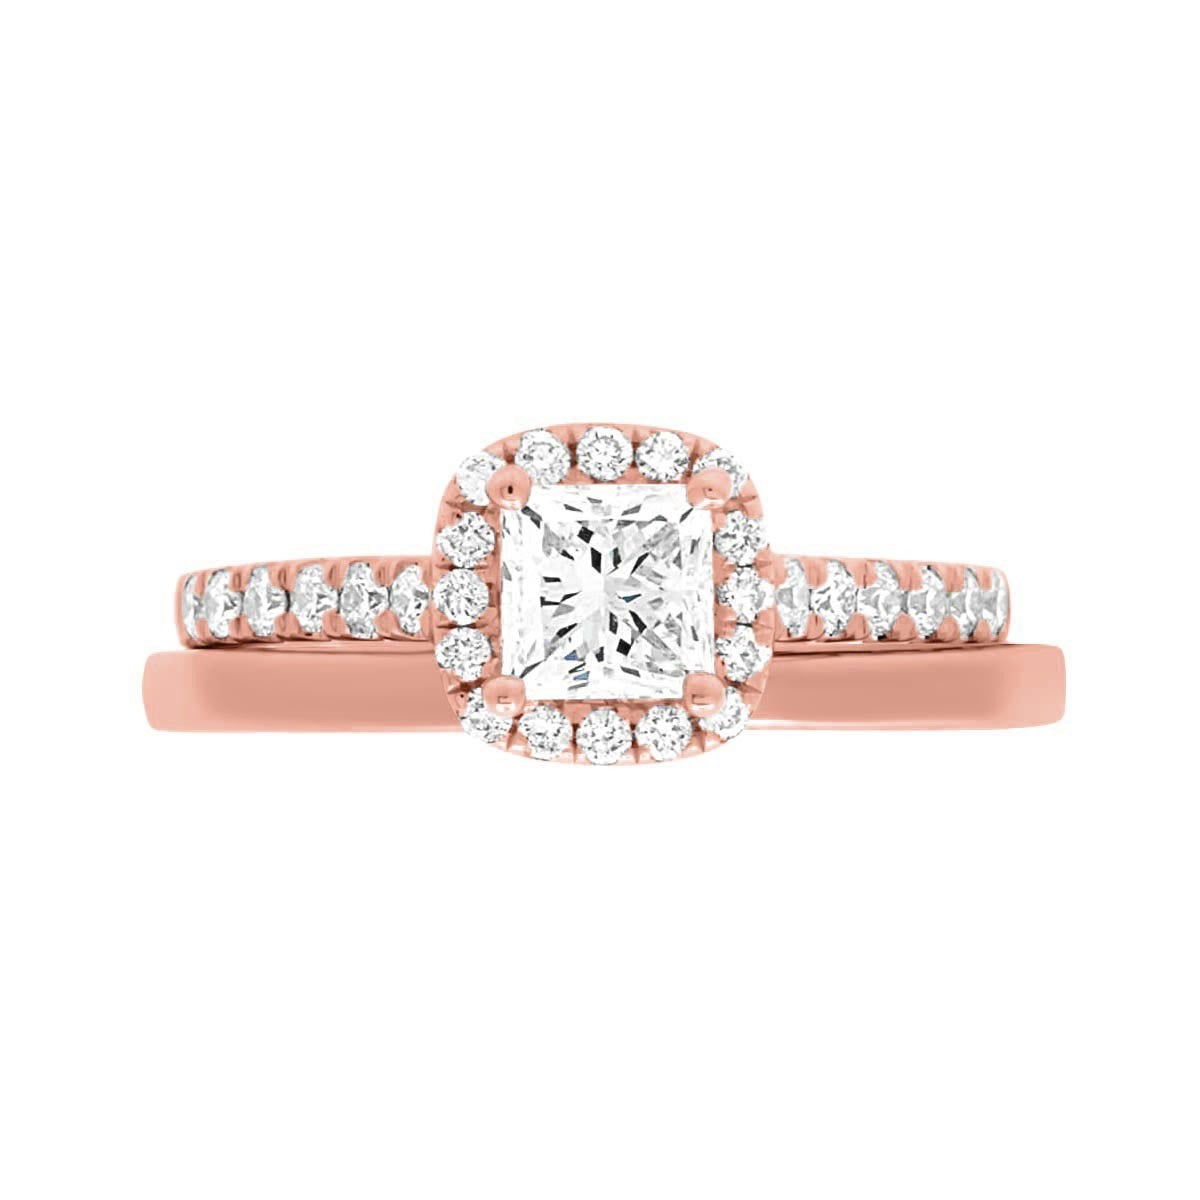 Princess Cut Diamond Halo Ring in rose gold with a plain wedding ring